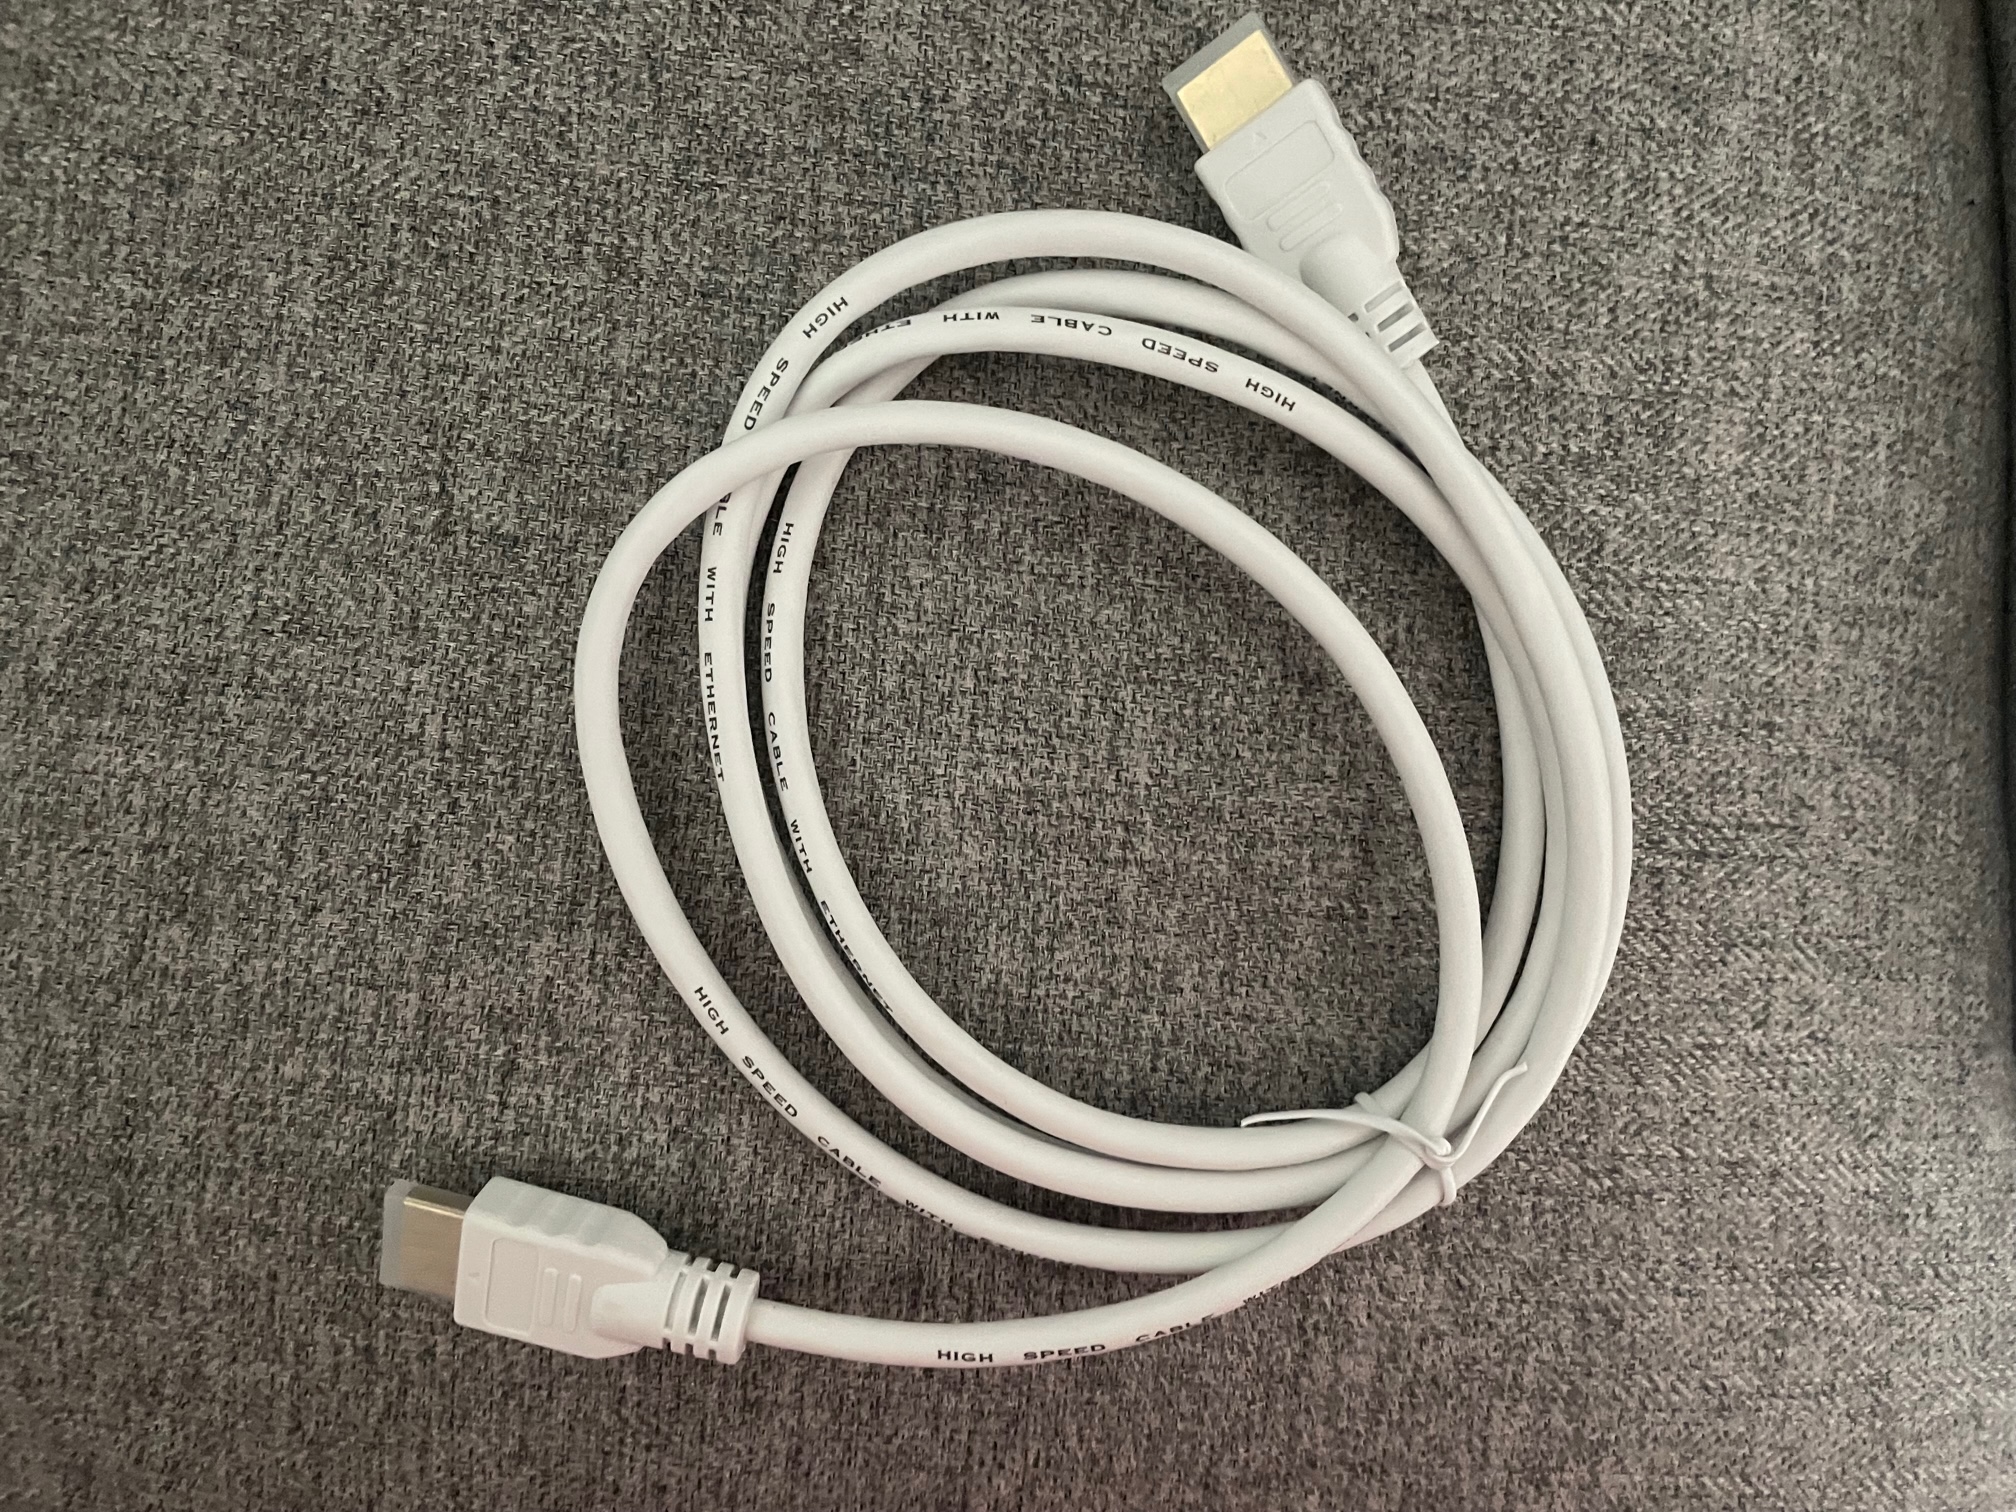 HD TO HD CABLE IN WHITE